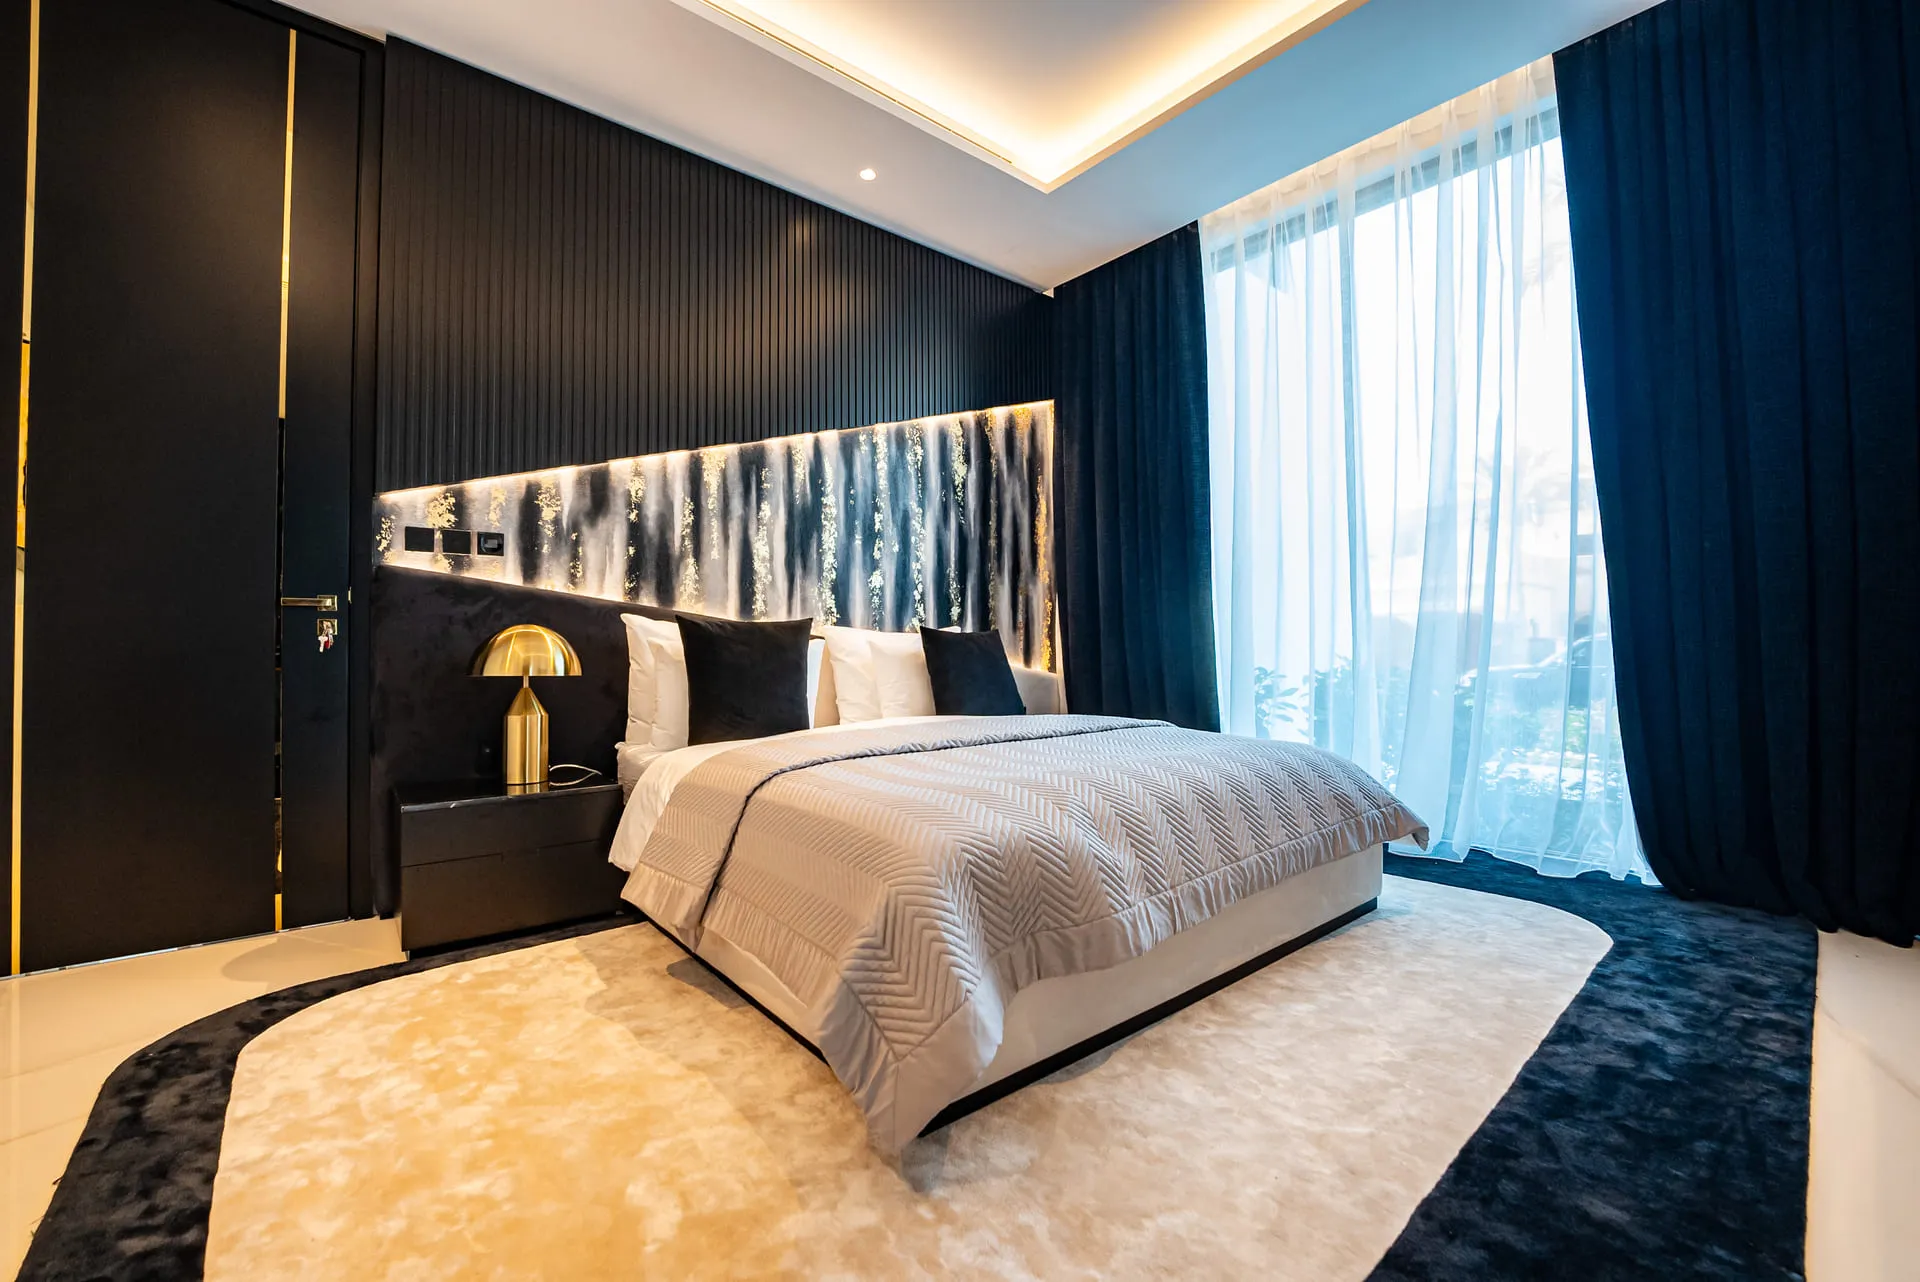 A stylish bedroom with elegant black and gold accents, creating a modern and luxurious ambiance.